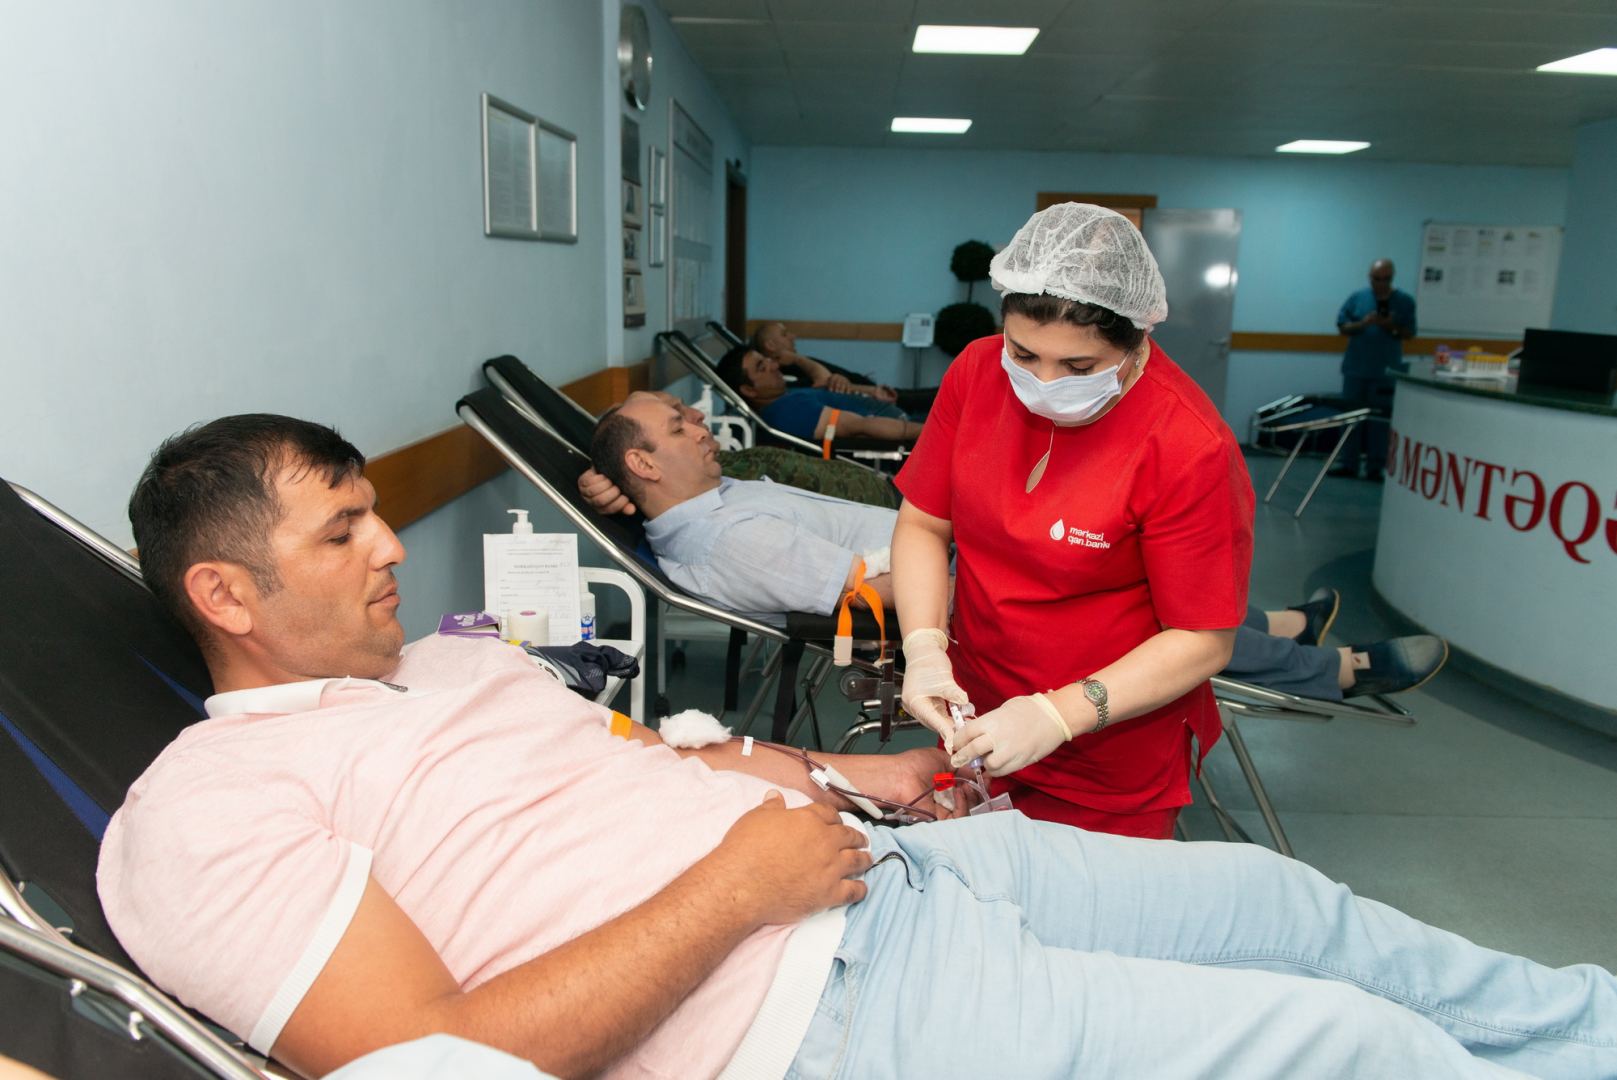 A blood donation campaign was held at "Baku Steel Company" CJSC (PHOTO)